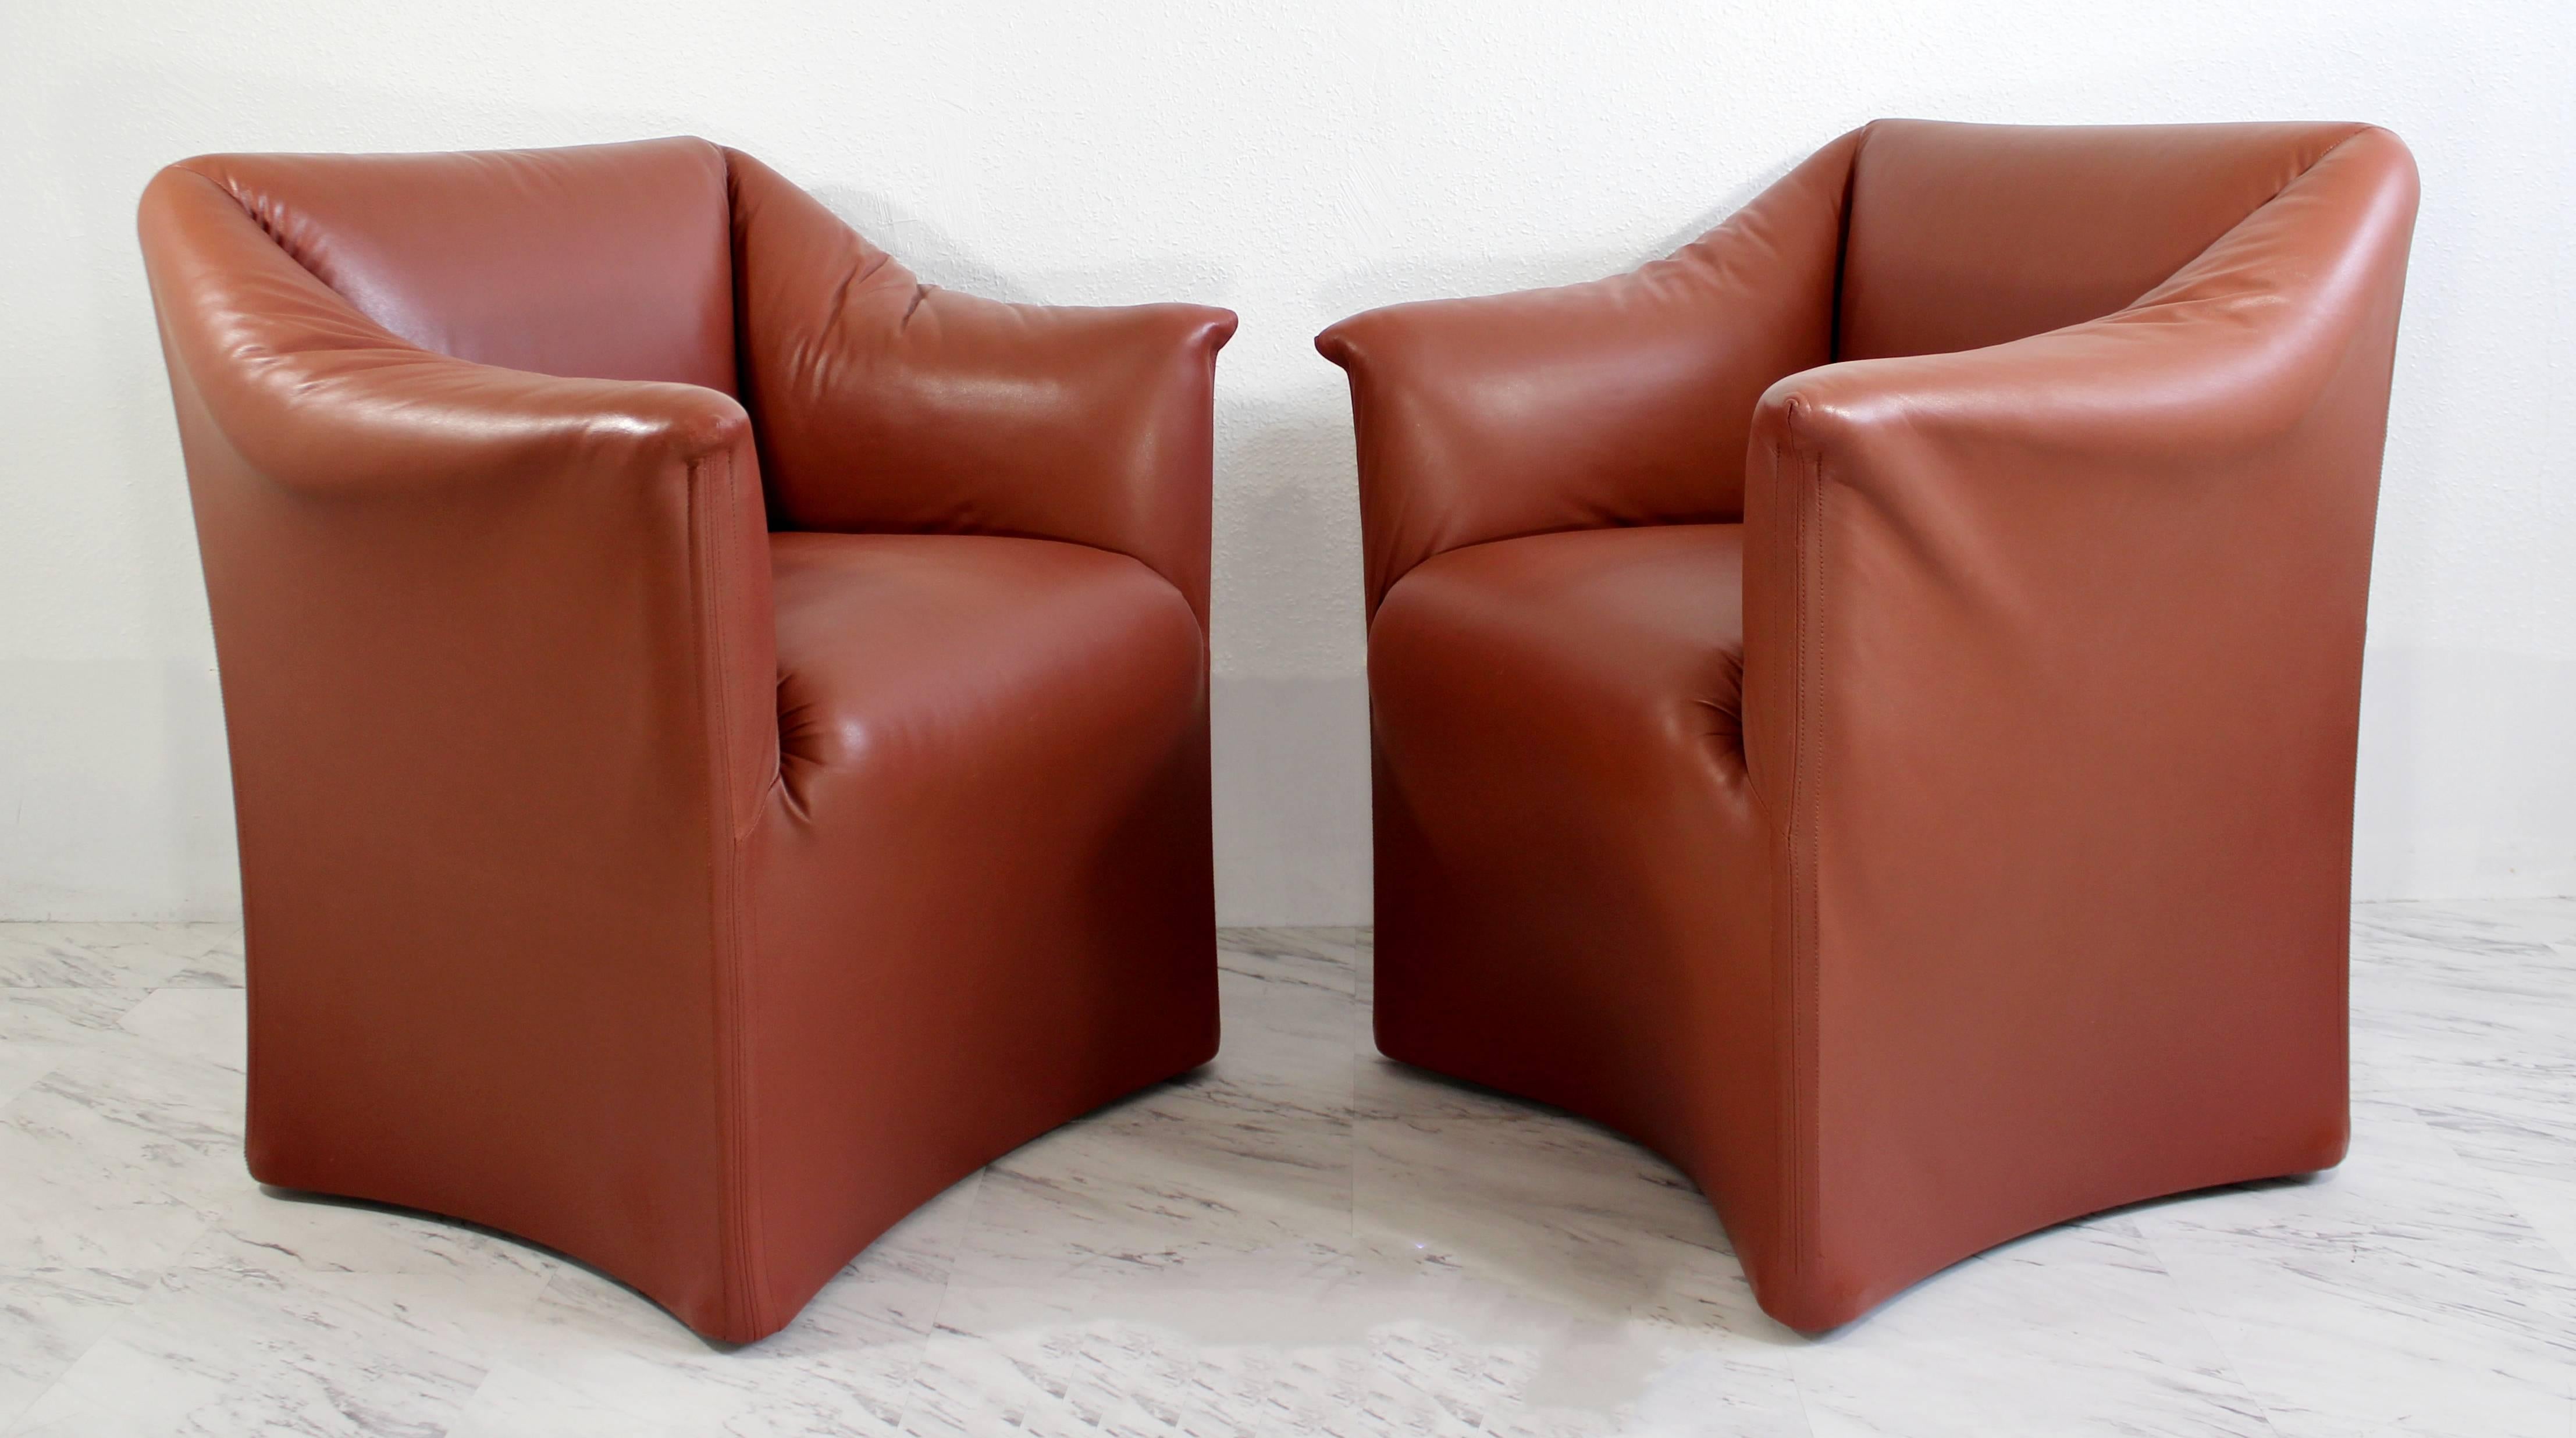 For your consideration is a daring pair of tentazione leather club chairs by Mario Bellini for Cassina. In great condition. The dimensions are 31